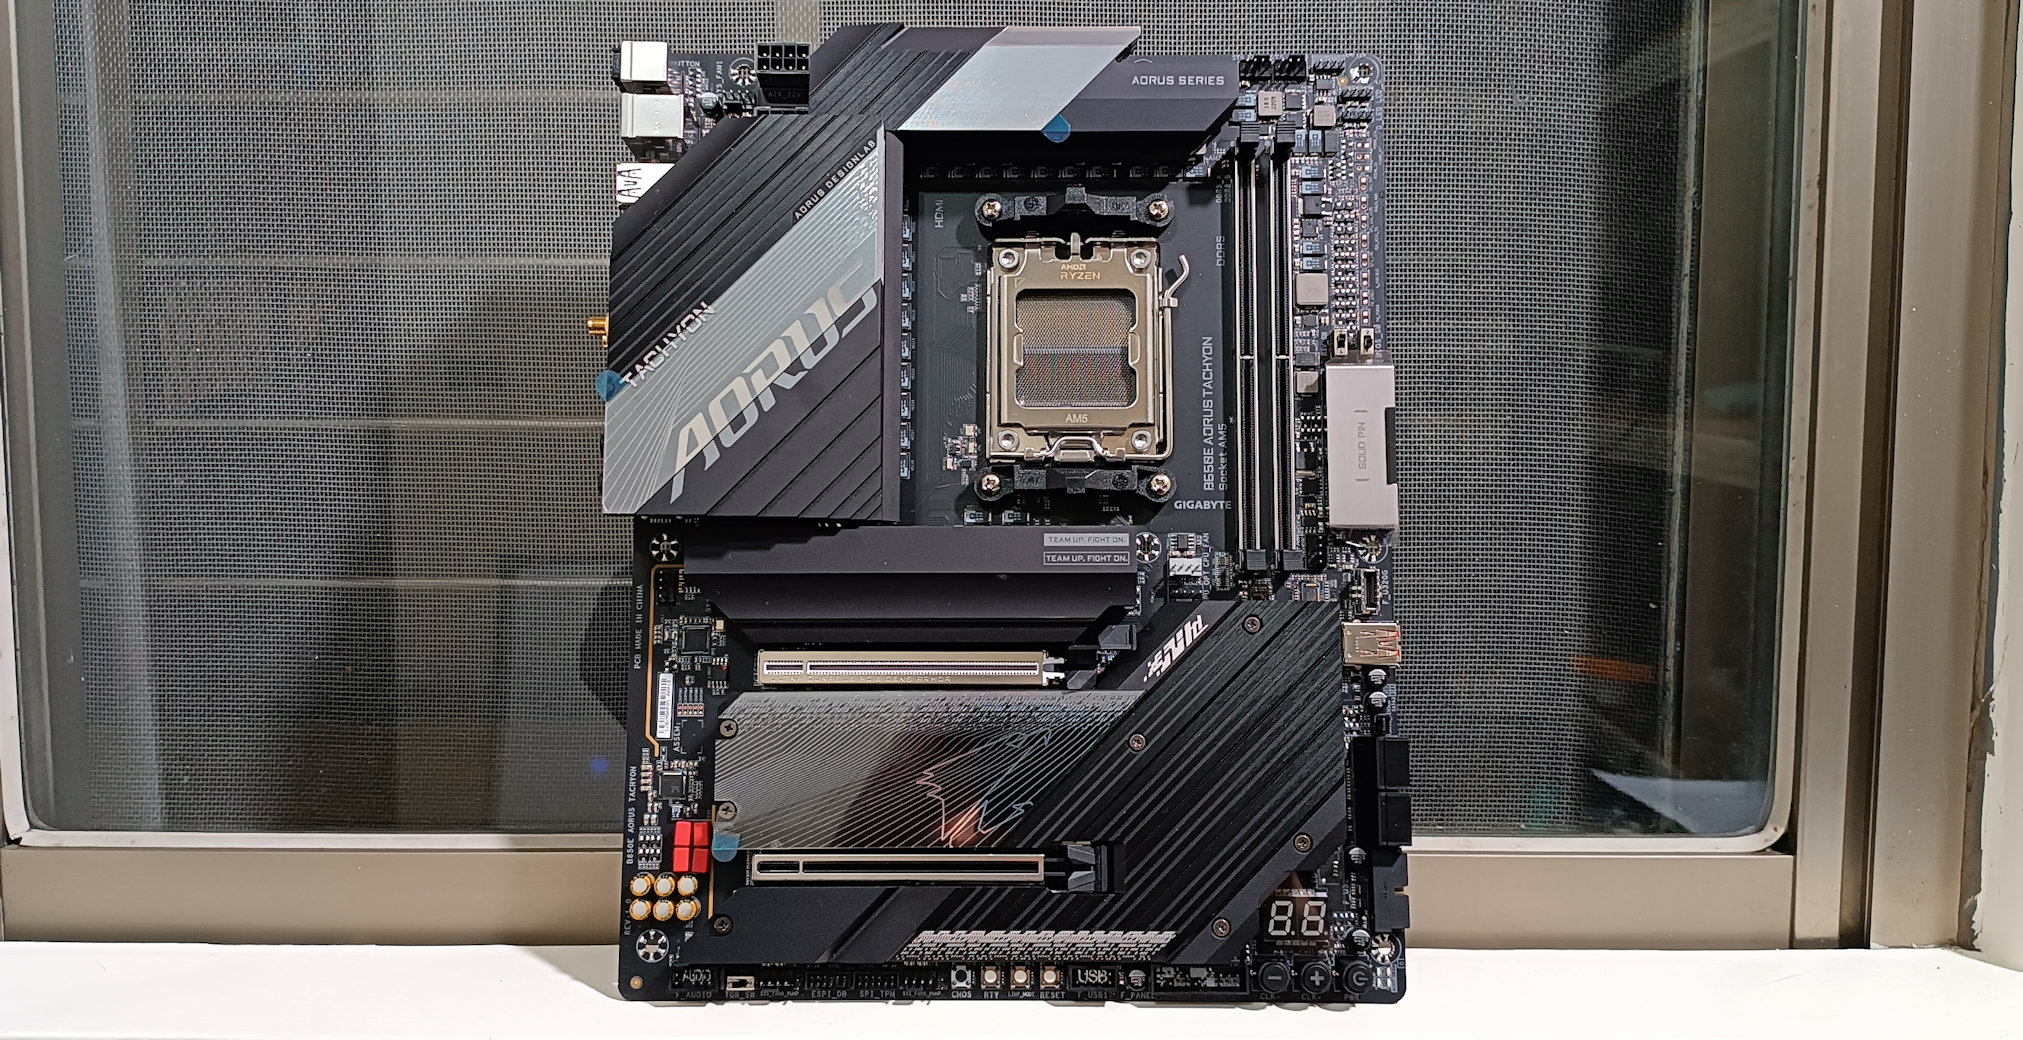 Aorus B650E Tachyon: First pictures of Gigabyte's new motherboard